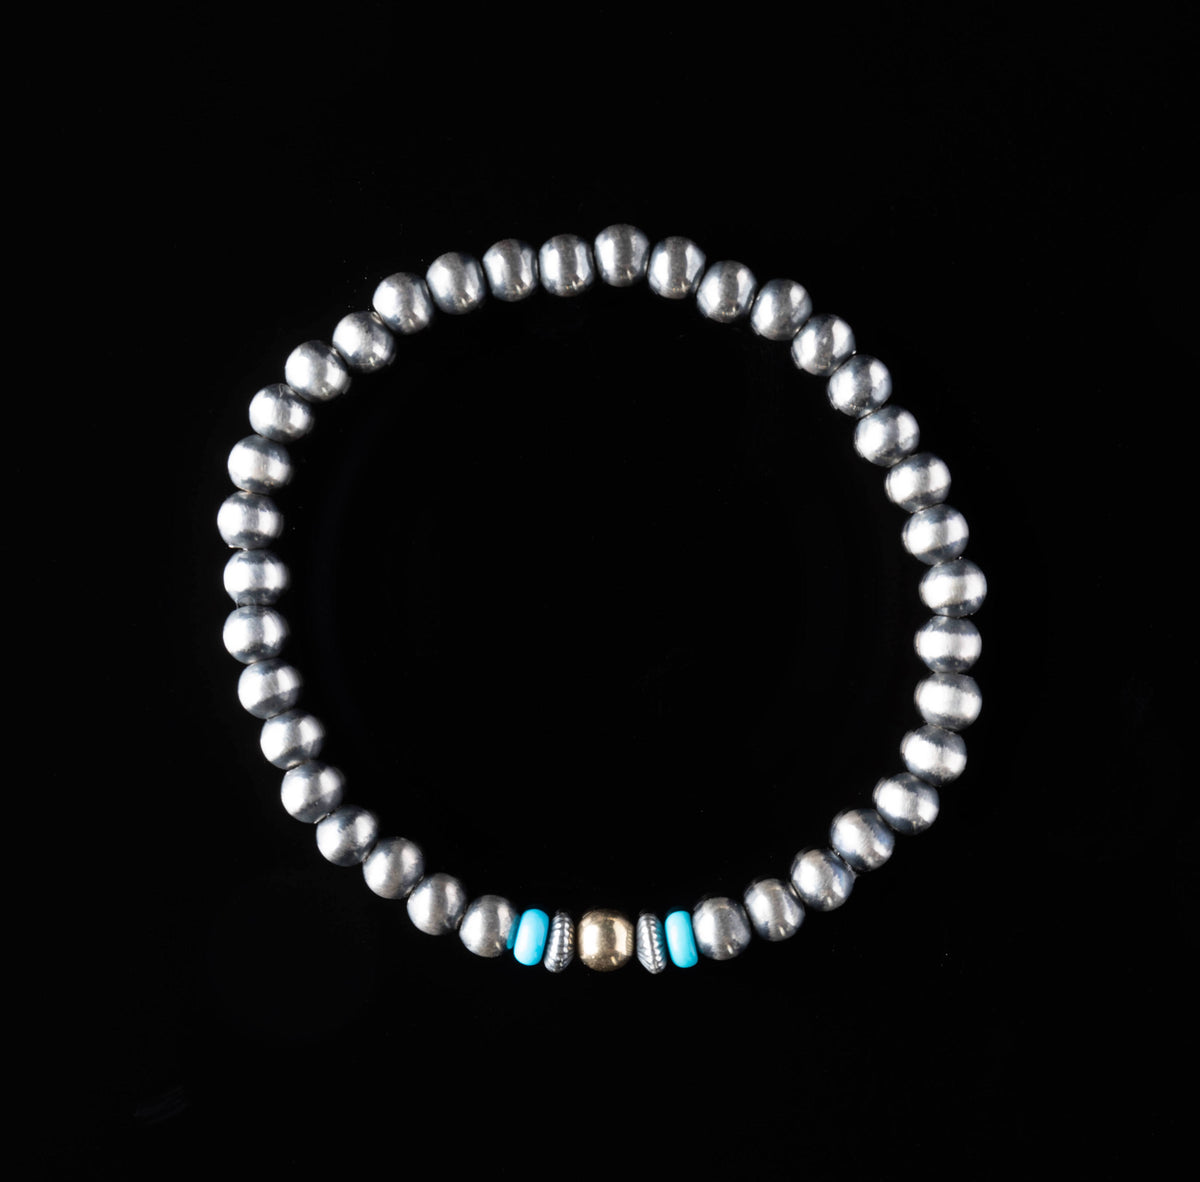 5mm Shoofly505 Stretch Bracelet with Turquoise Accent Beads